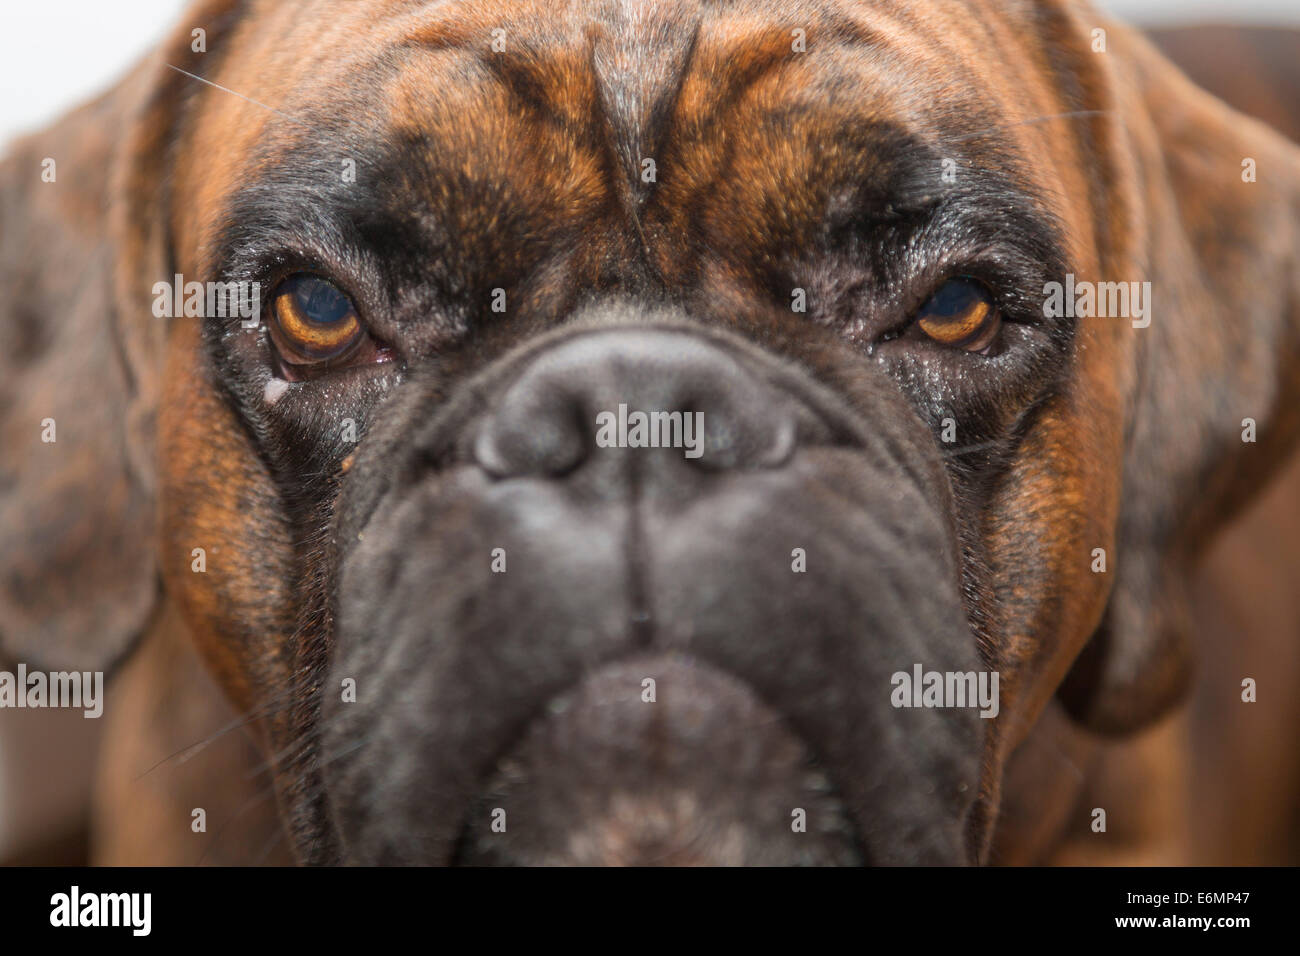 Young Boxer, dog, looking bored, portrait Stock Photo